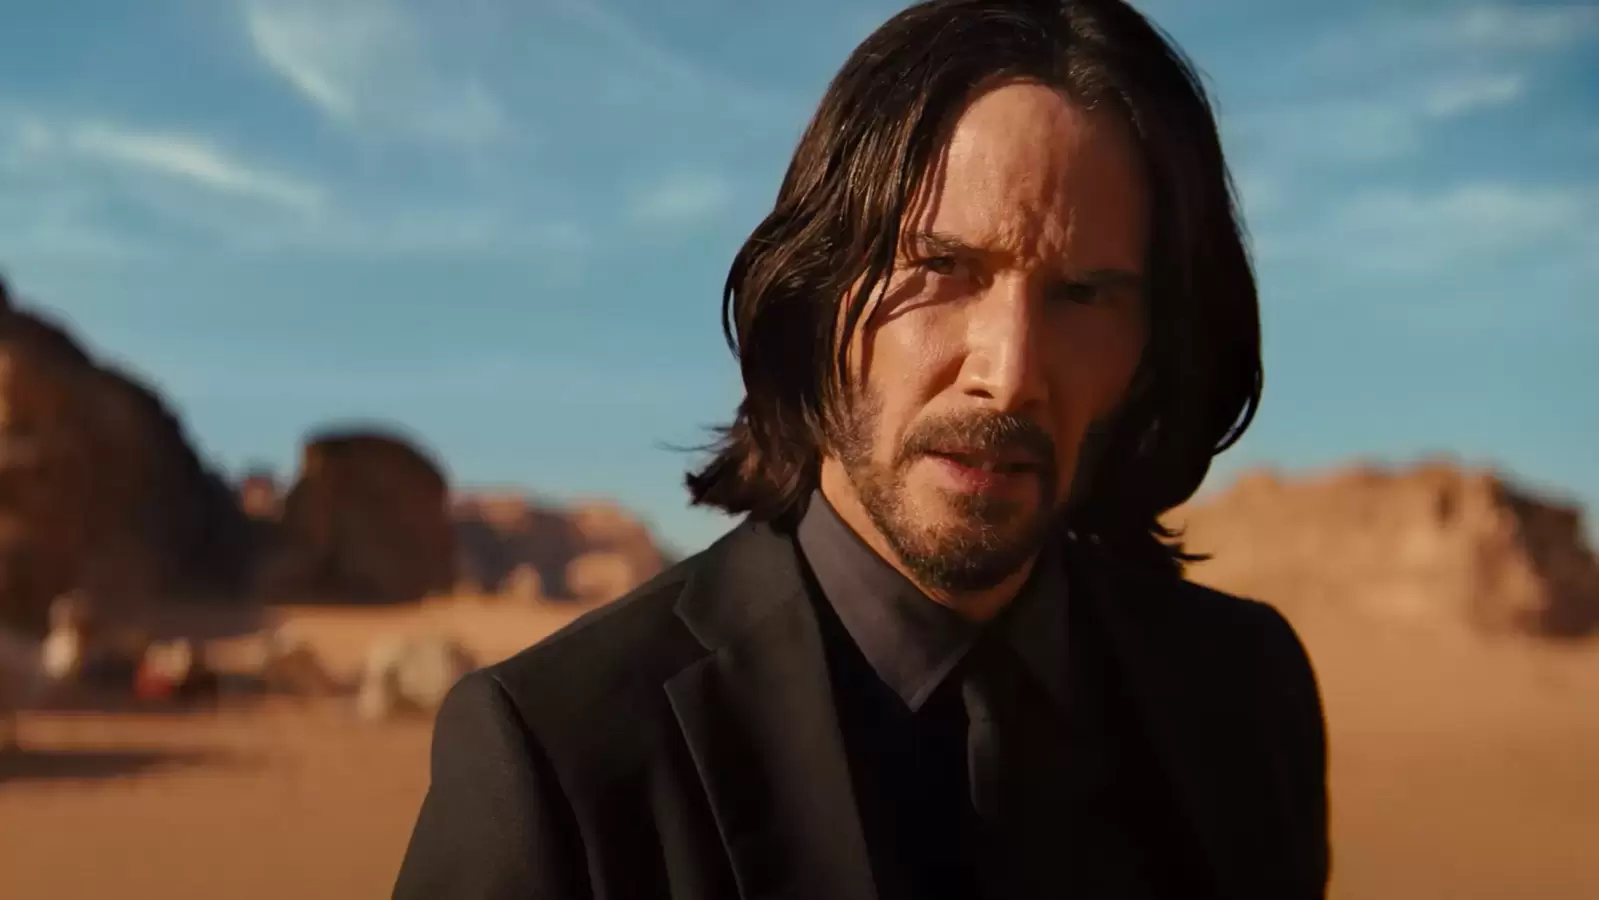 Inside 'The Continental,' The Spin-Off Set In The 'John Wick' Universe